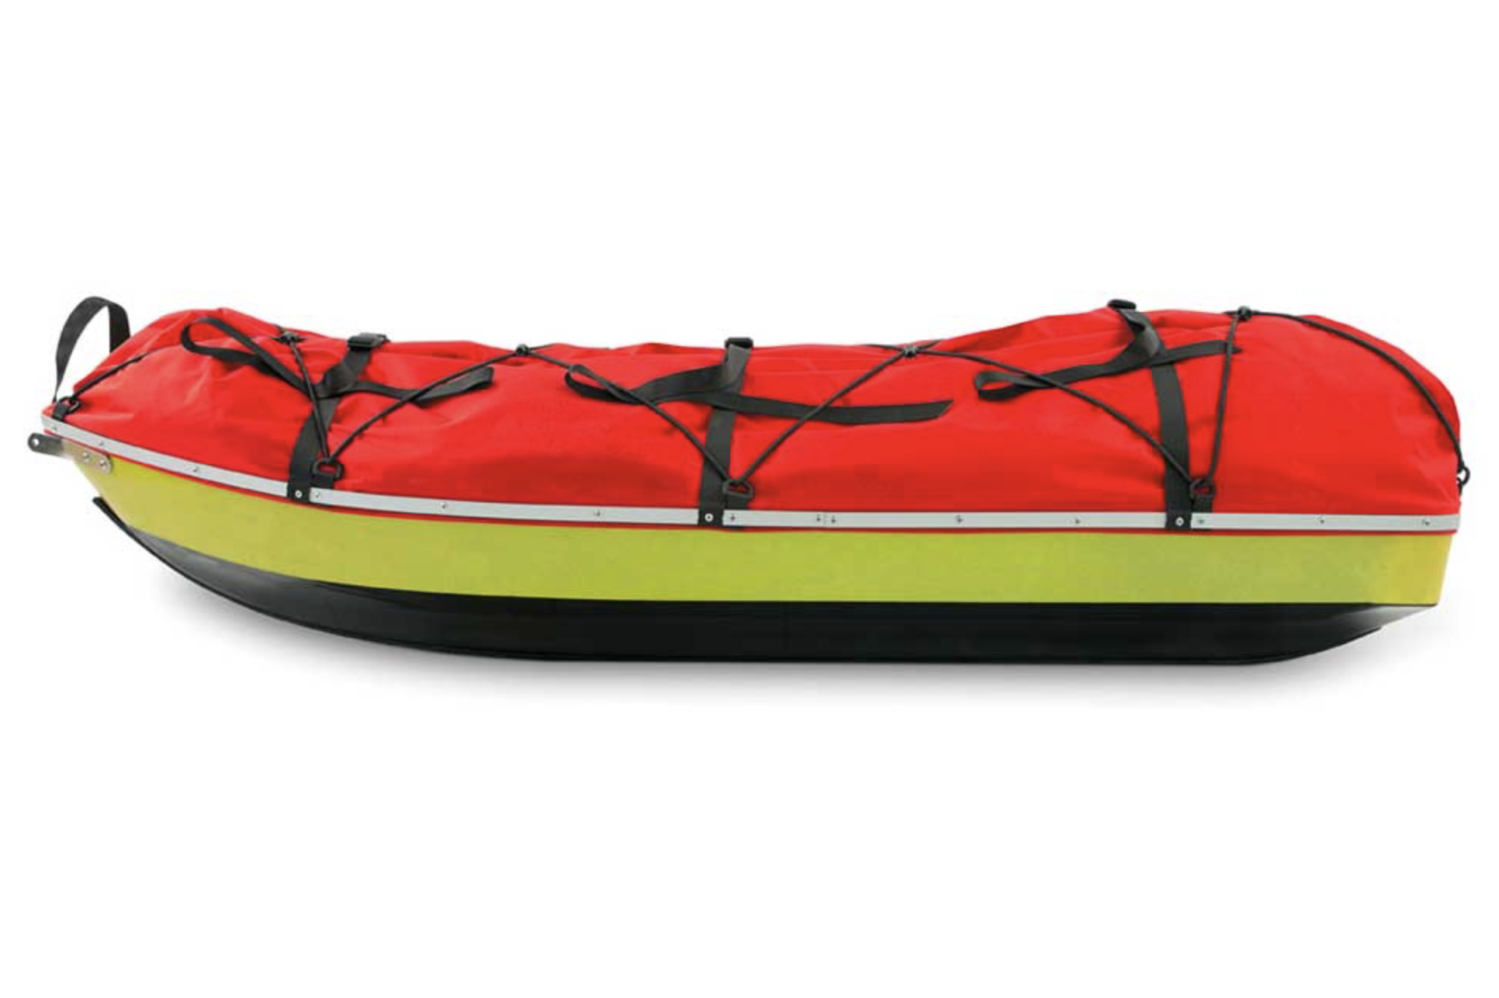 pulks/expedition sleds